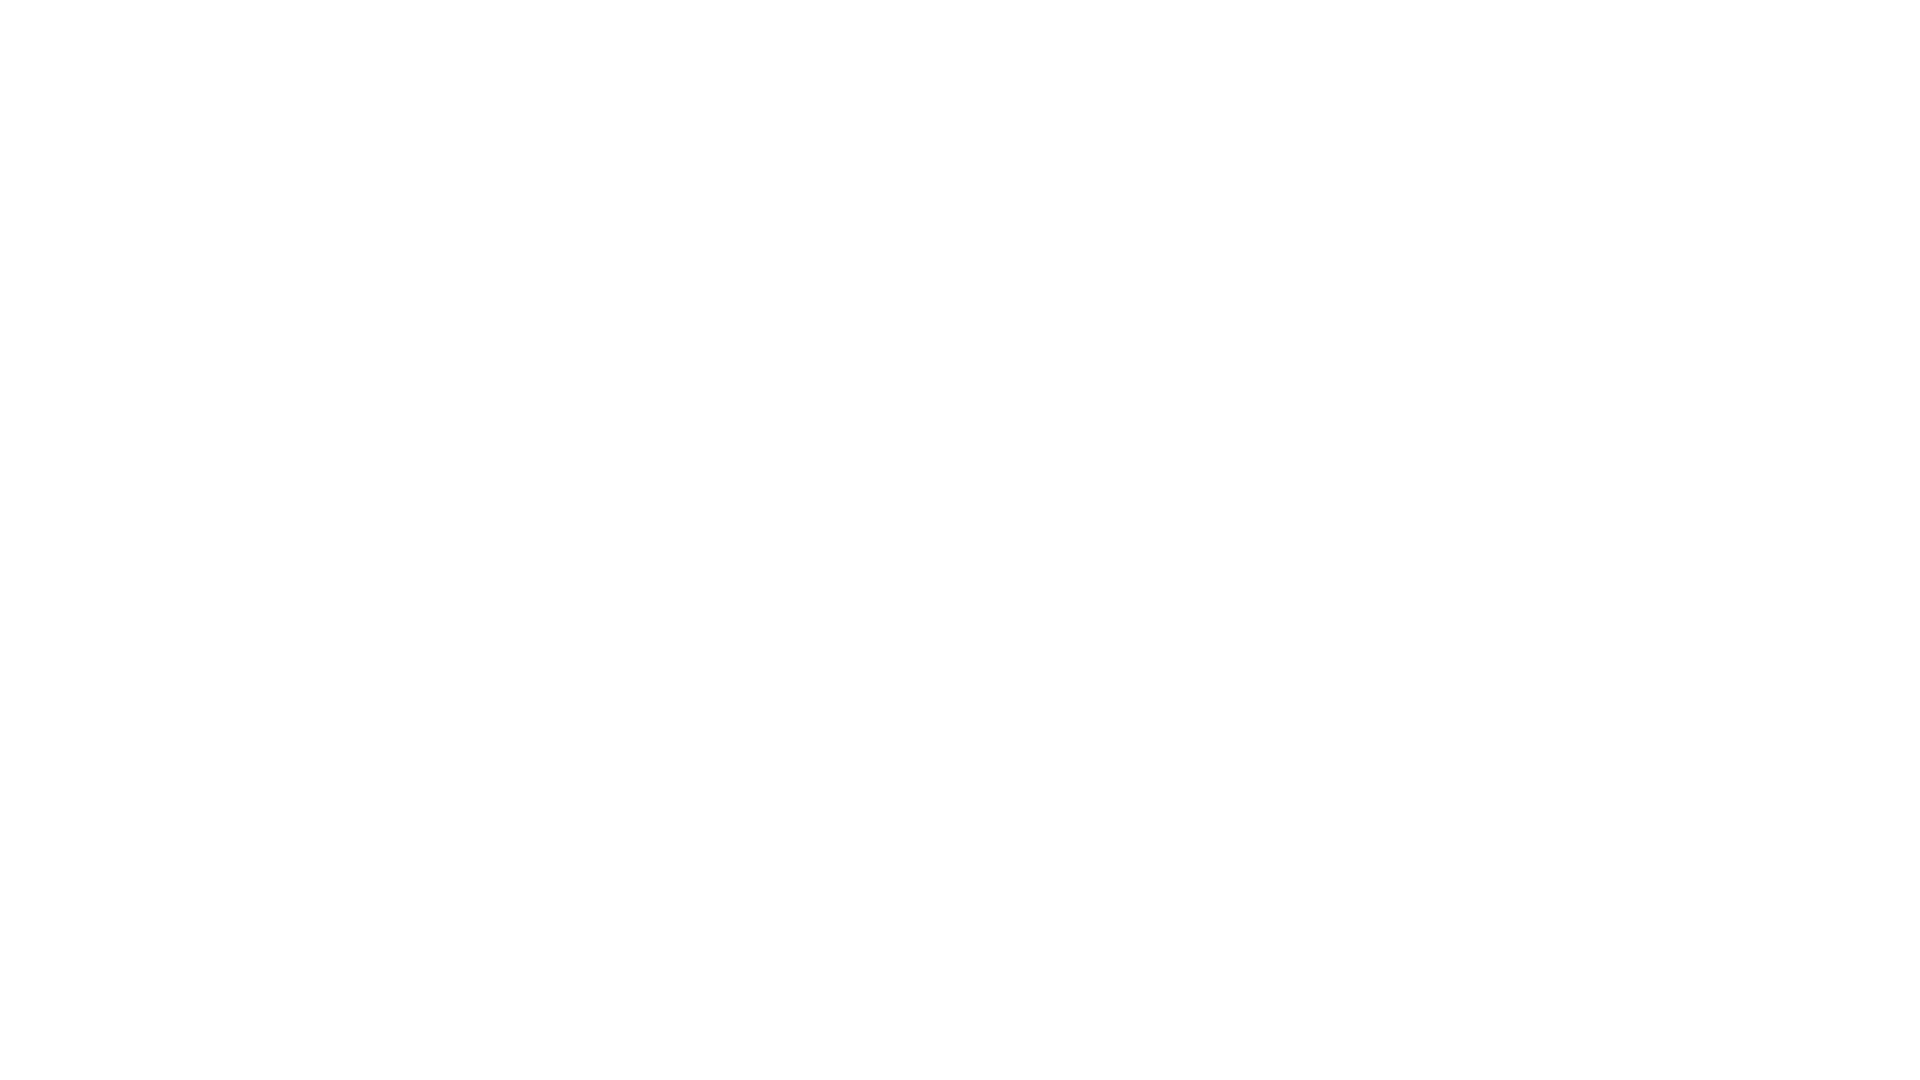 Merry Thieves